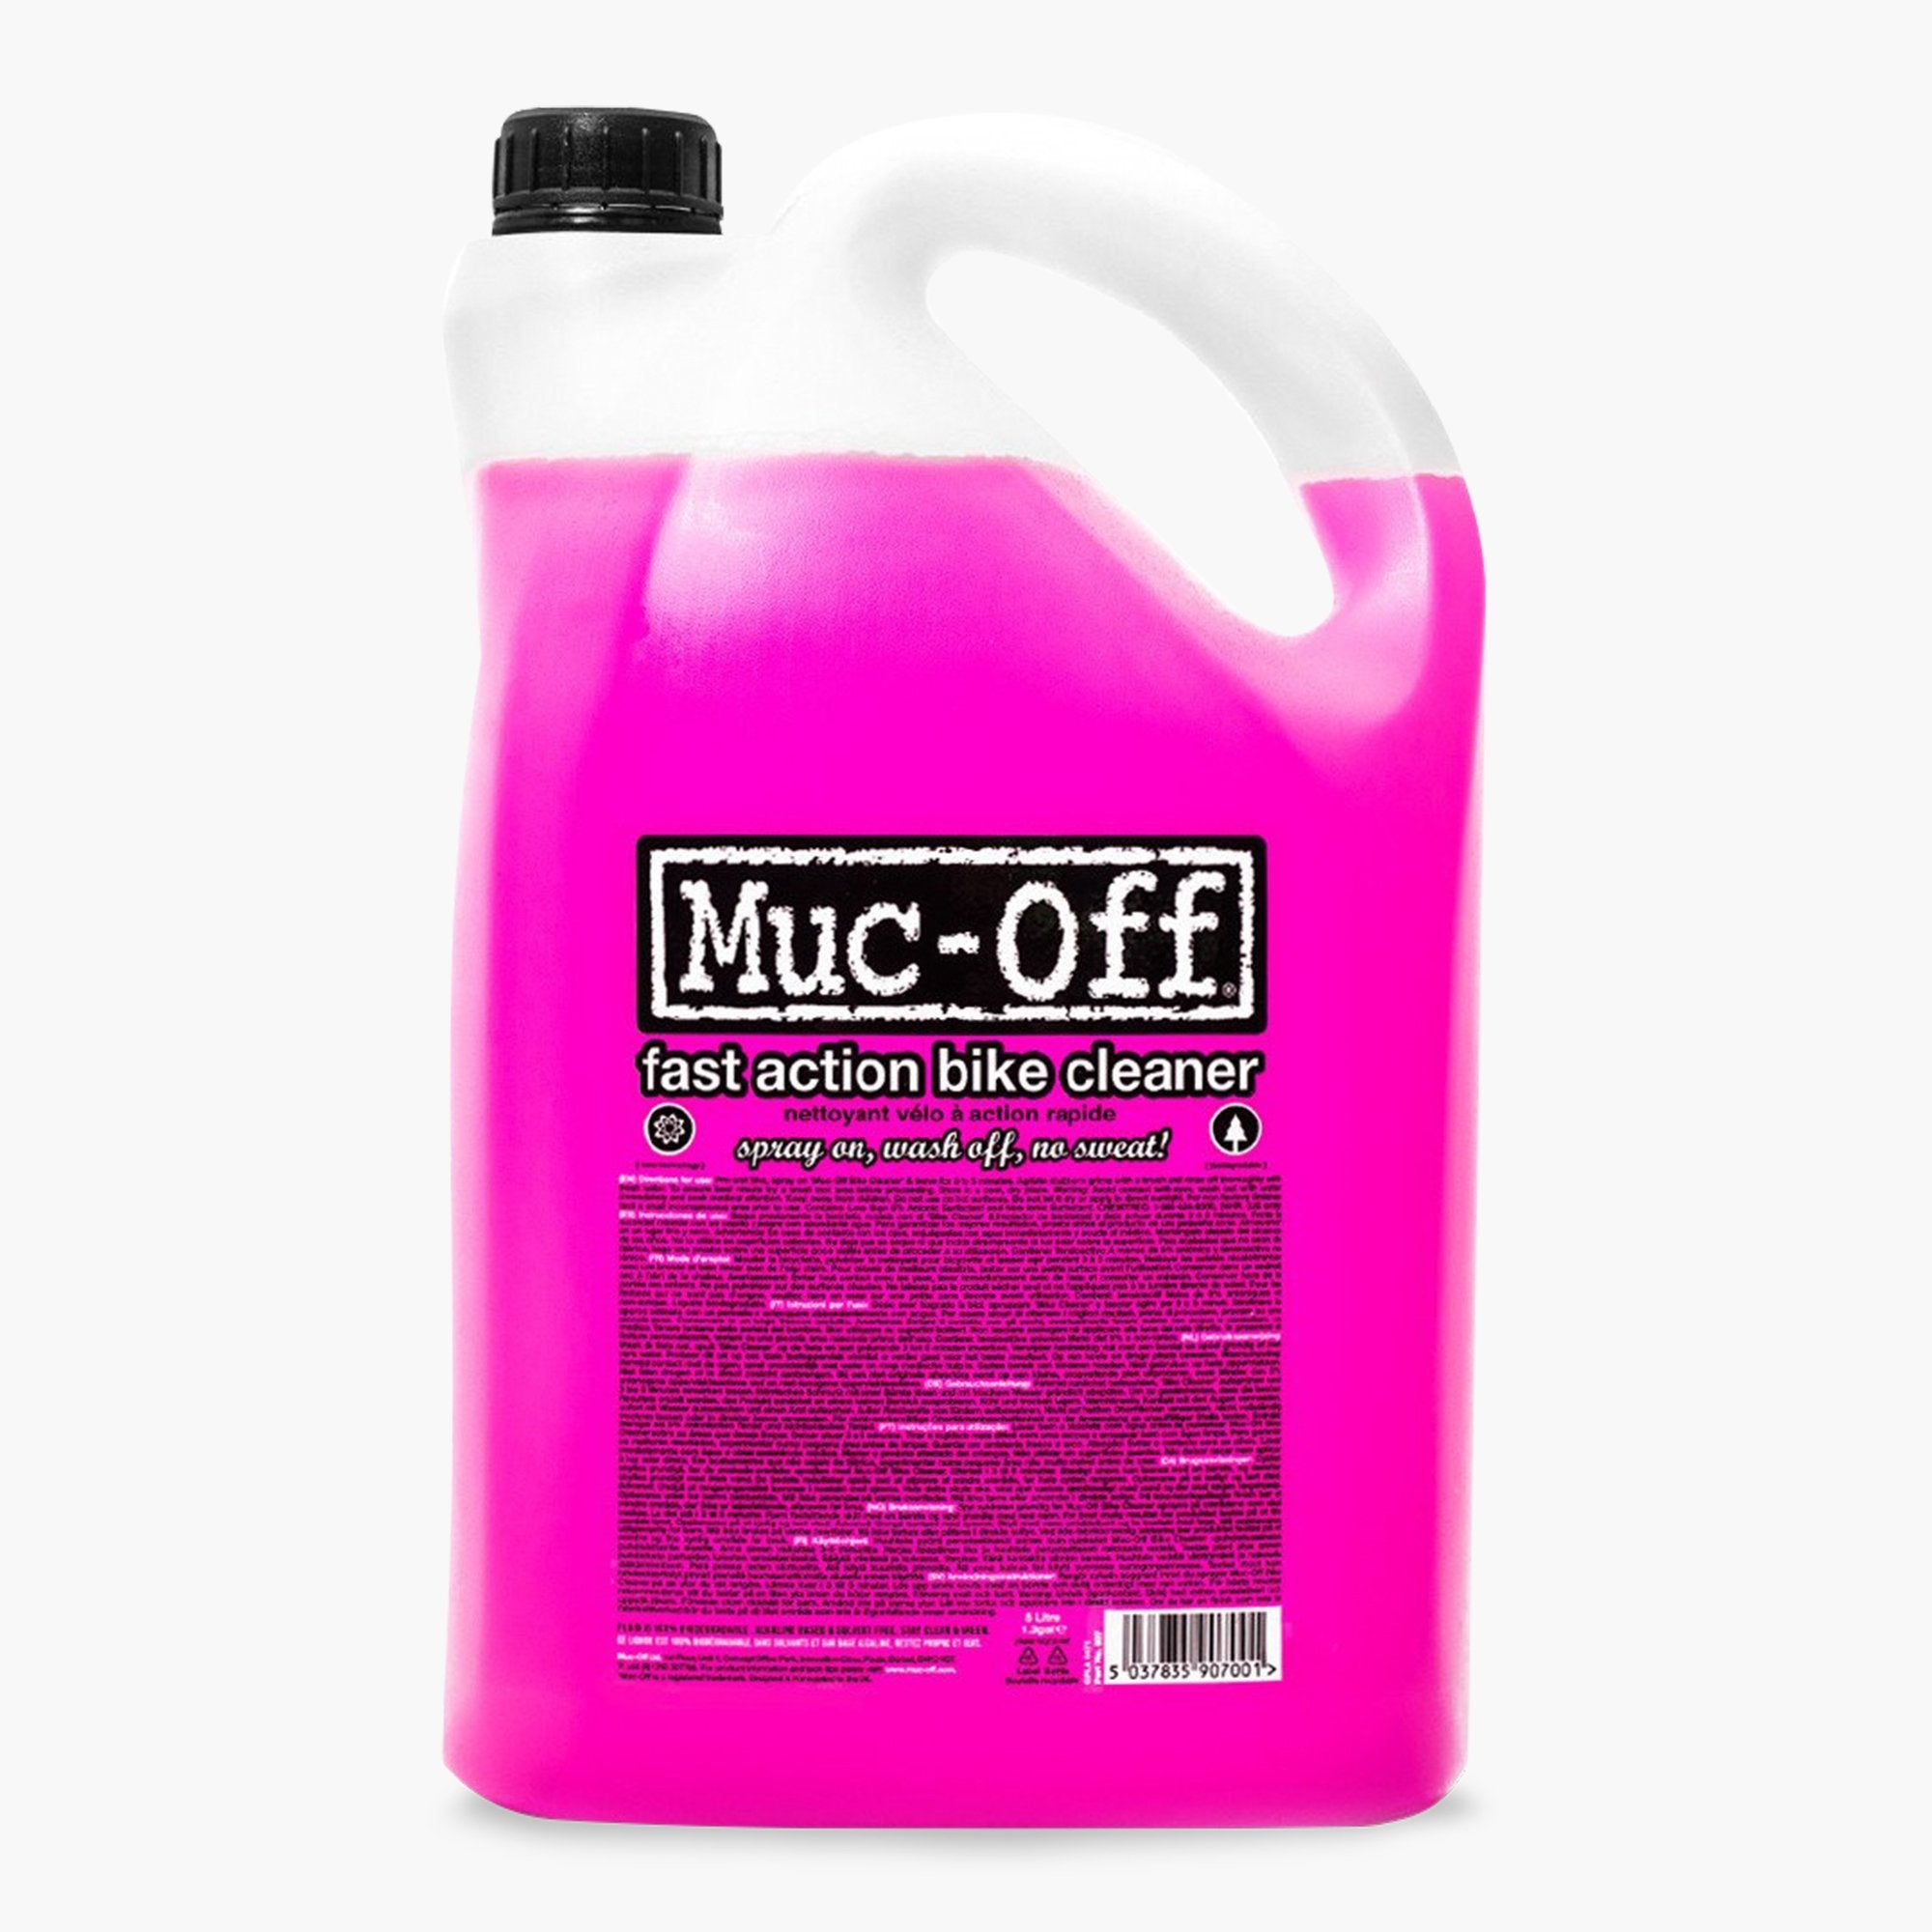 Muc-Off takes home Design and Innovation Award for sustainable bike cleaner  - Events - BikeBiz